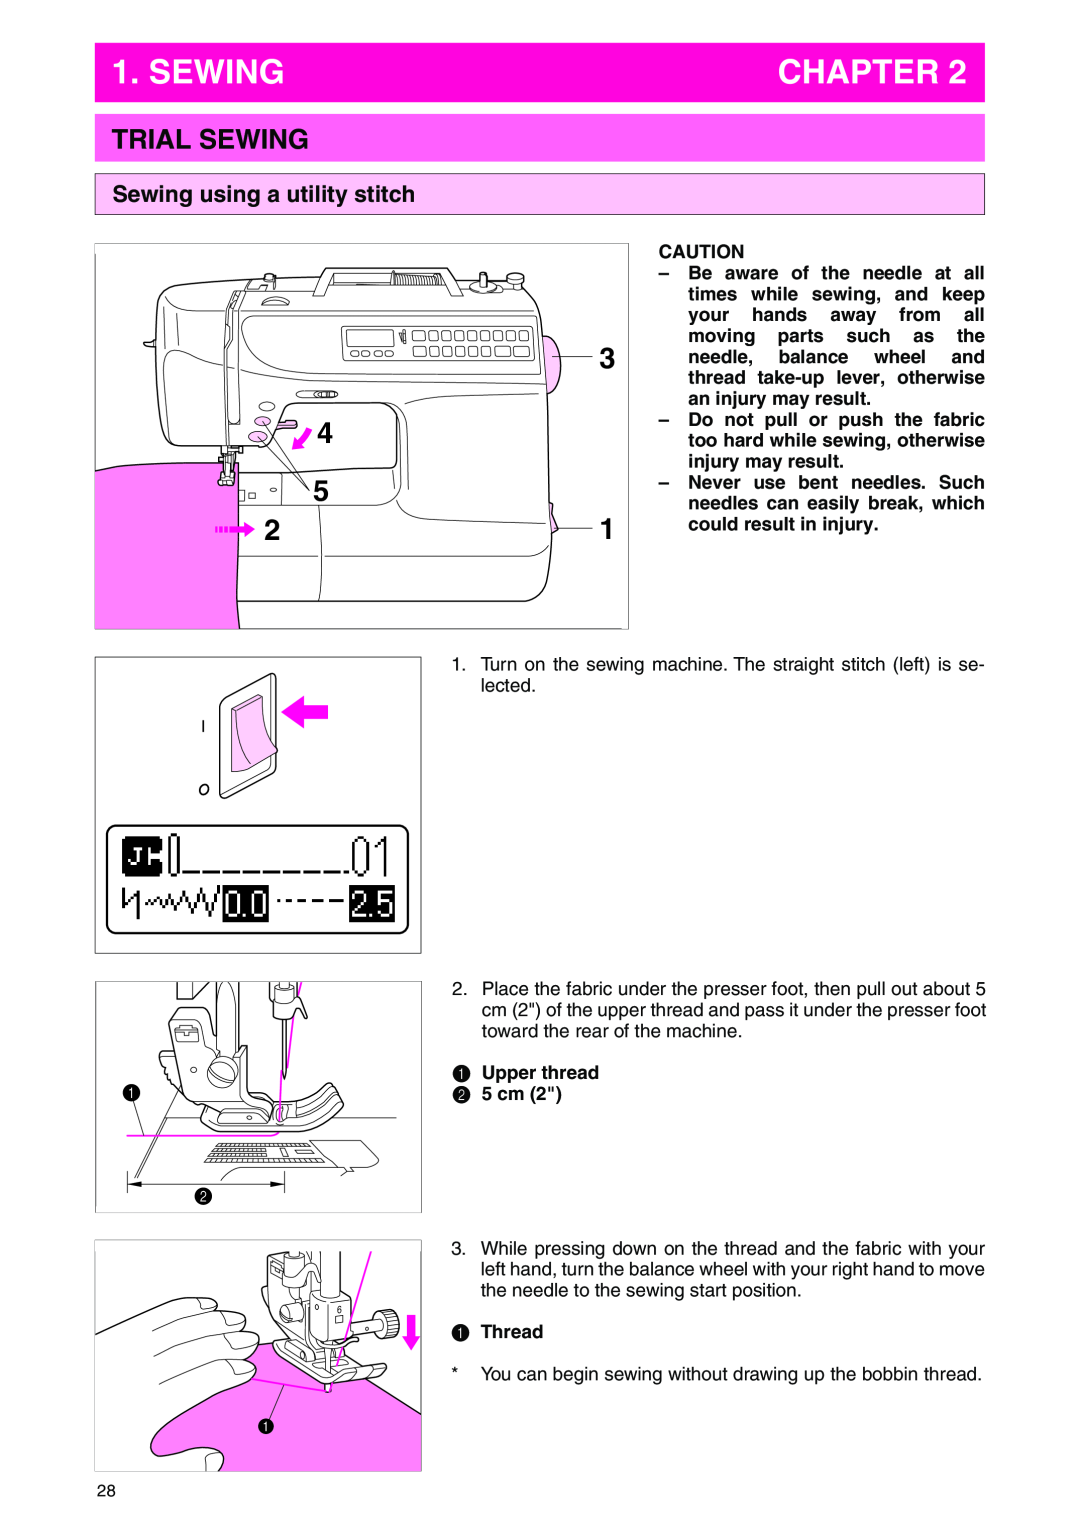 Brother PC 3000 Trial Sewing, Sewing using a utility stitch, Be aware of the needle at all, your hands away from all 